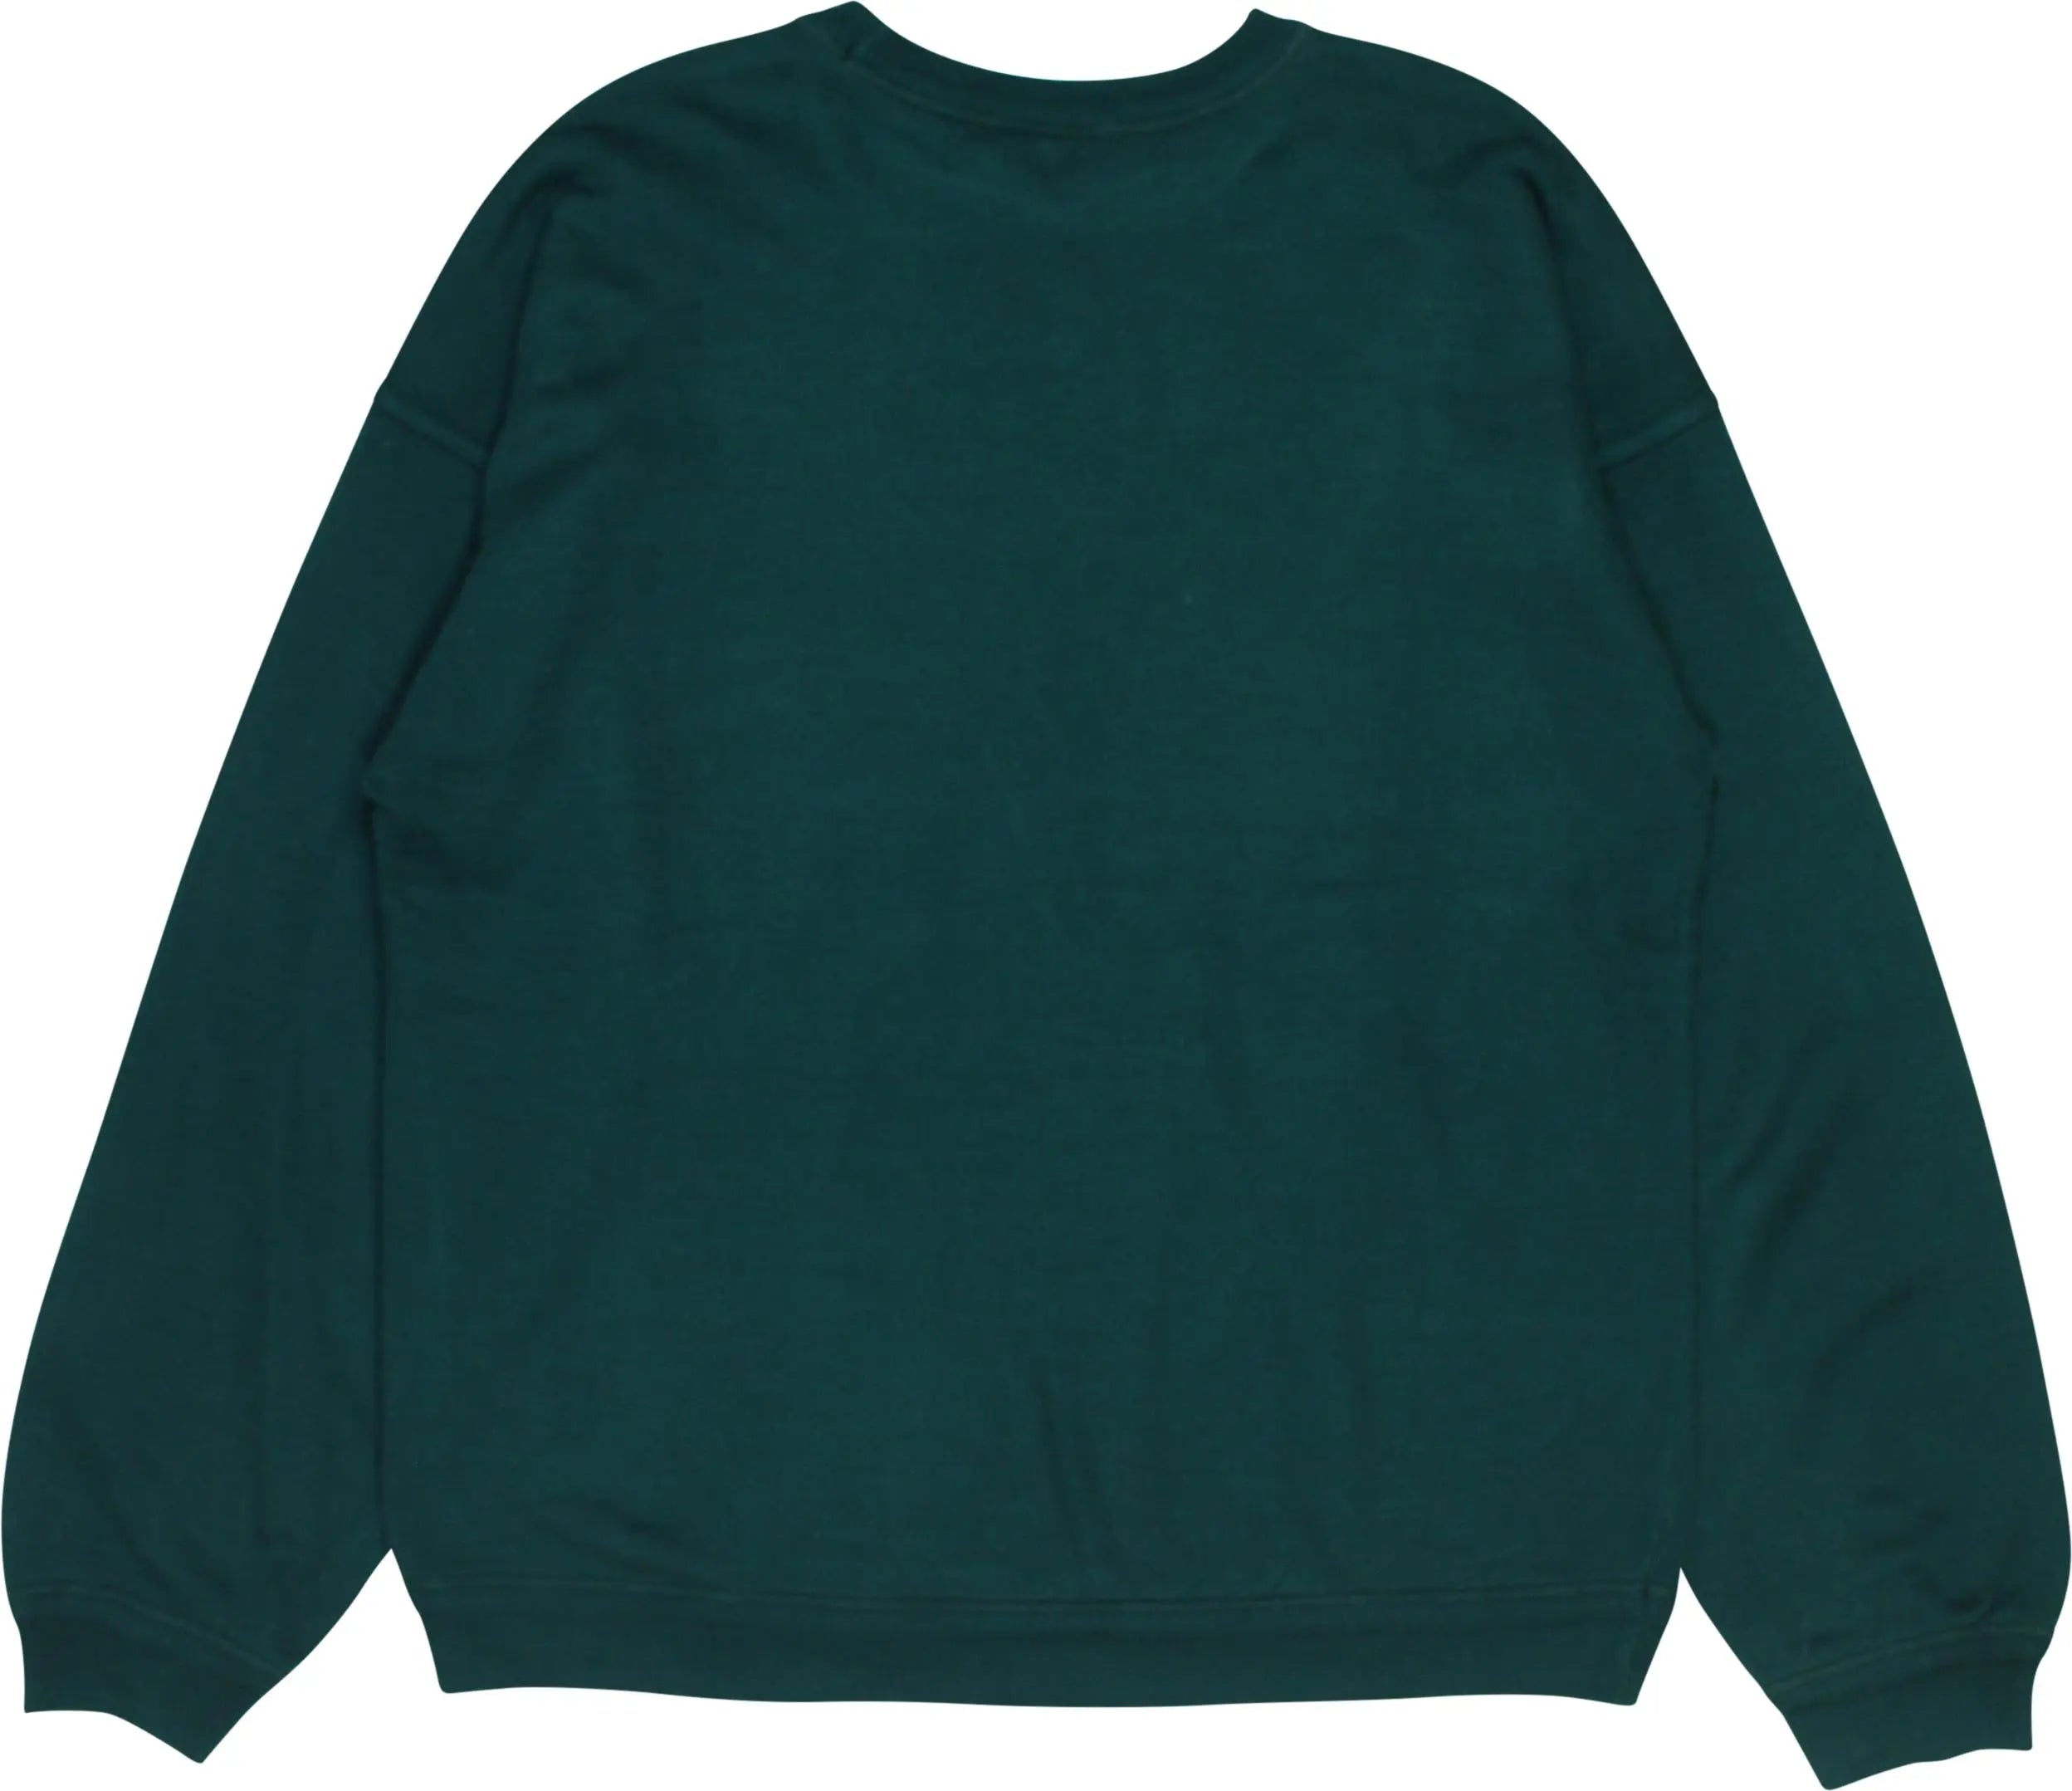 Unknown - Green Sweatshirt- ThriftTale.com - Vintage and second handclothing